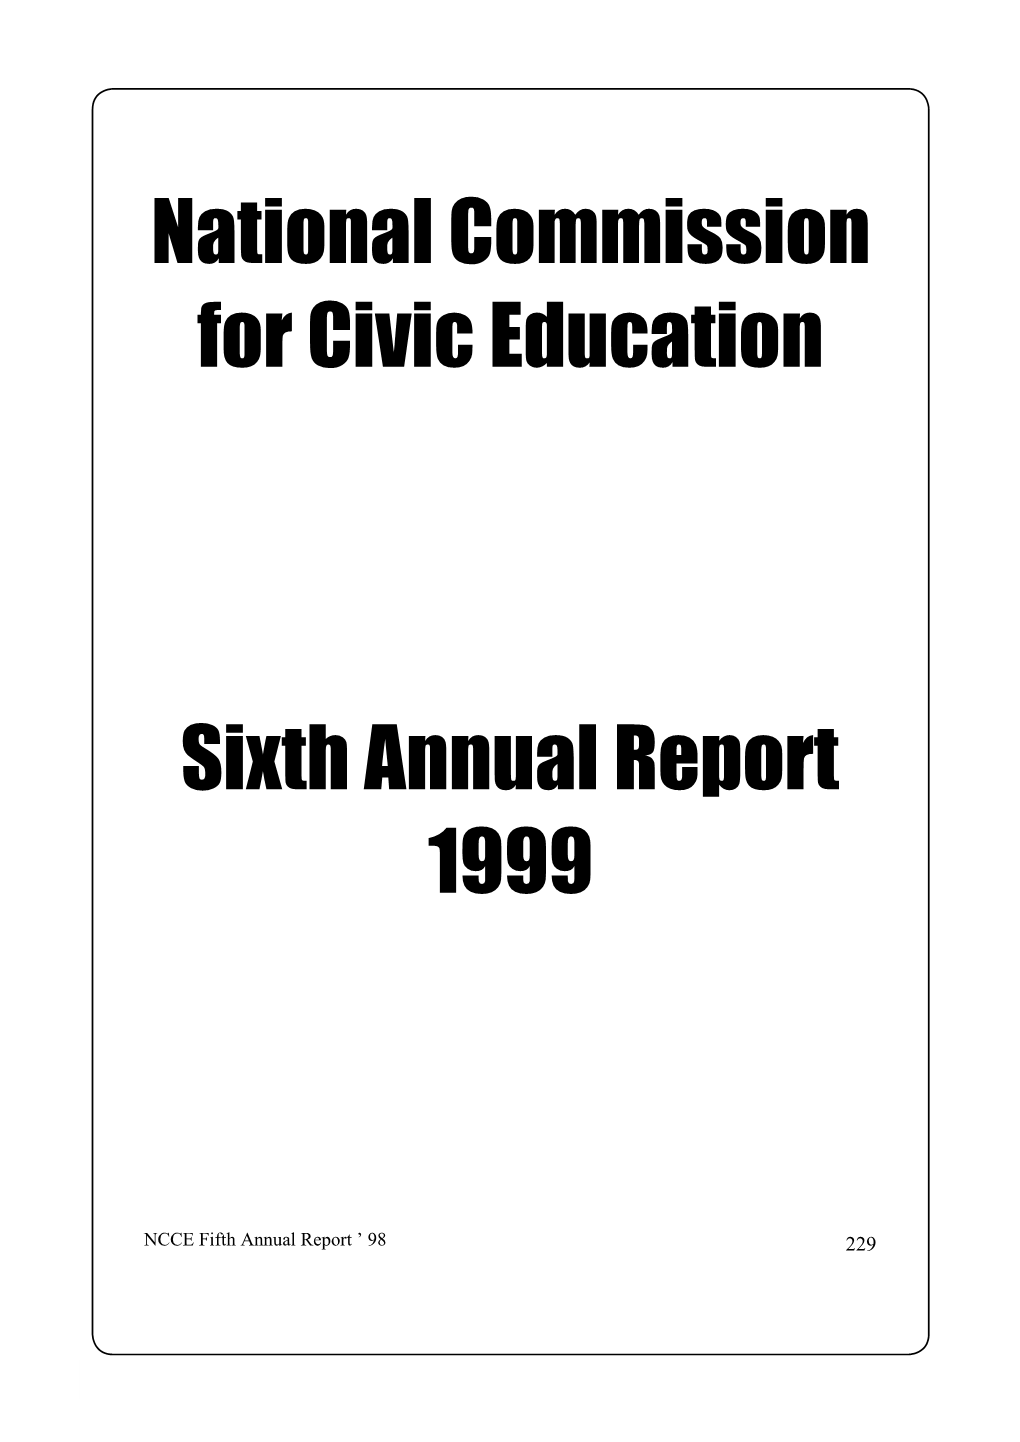 Sixth Annual Report 1999